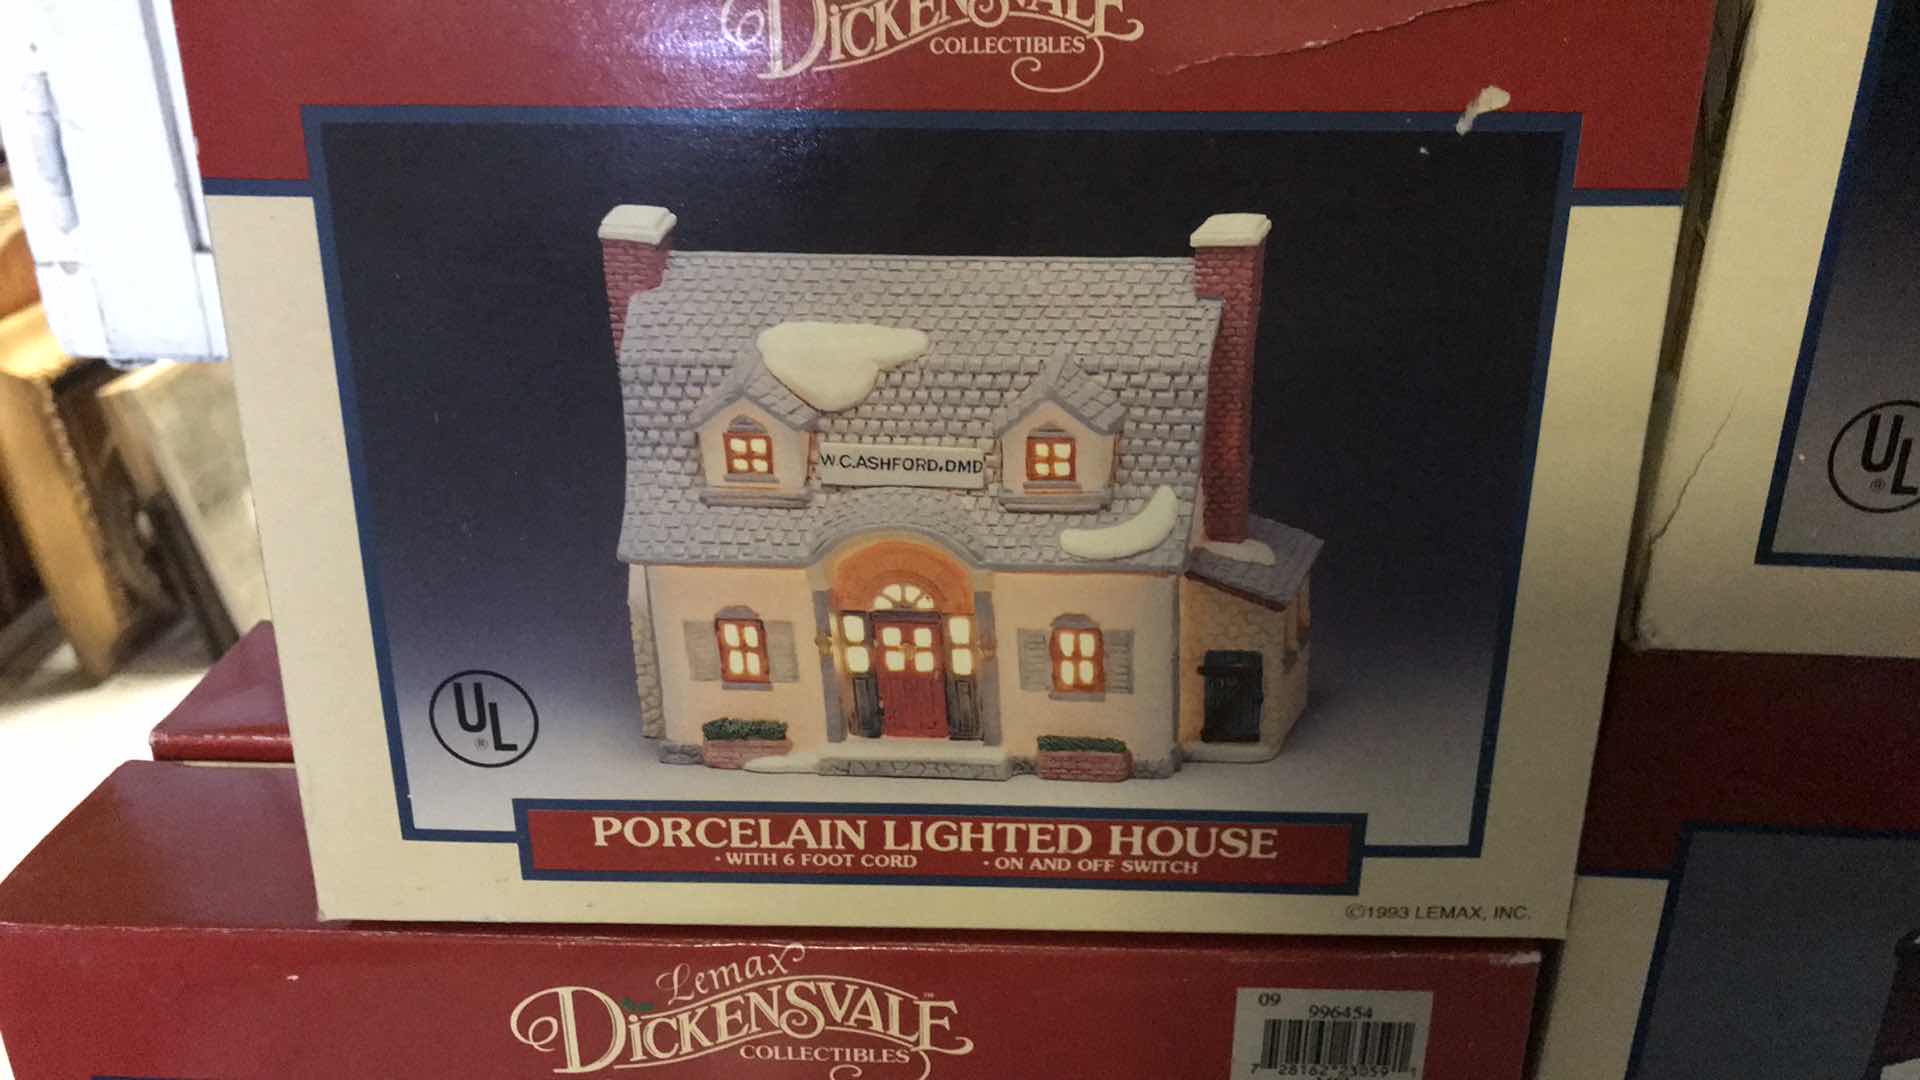 Photo 2 of LEMAX DICKENSVALE COLLECTABLES PORCELAIN LIGHTED HOUSES AND BRICK WALL